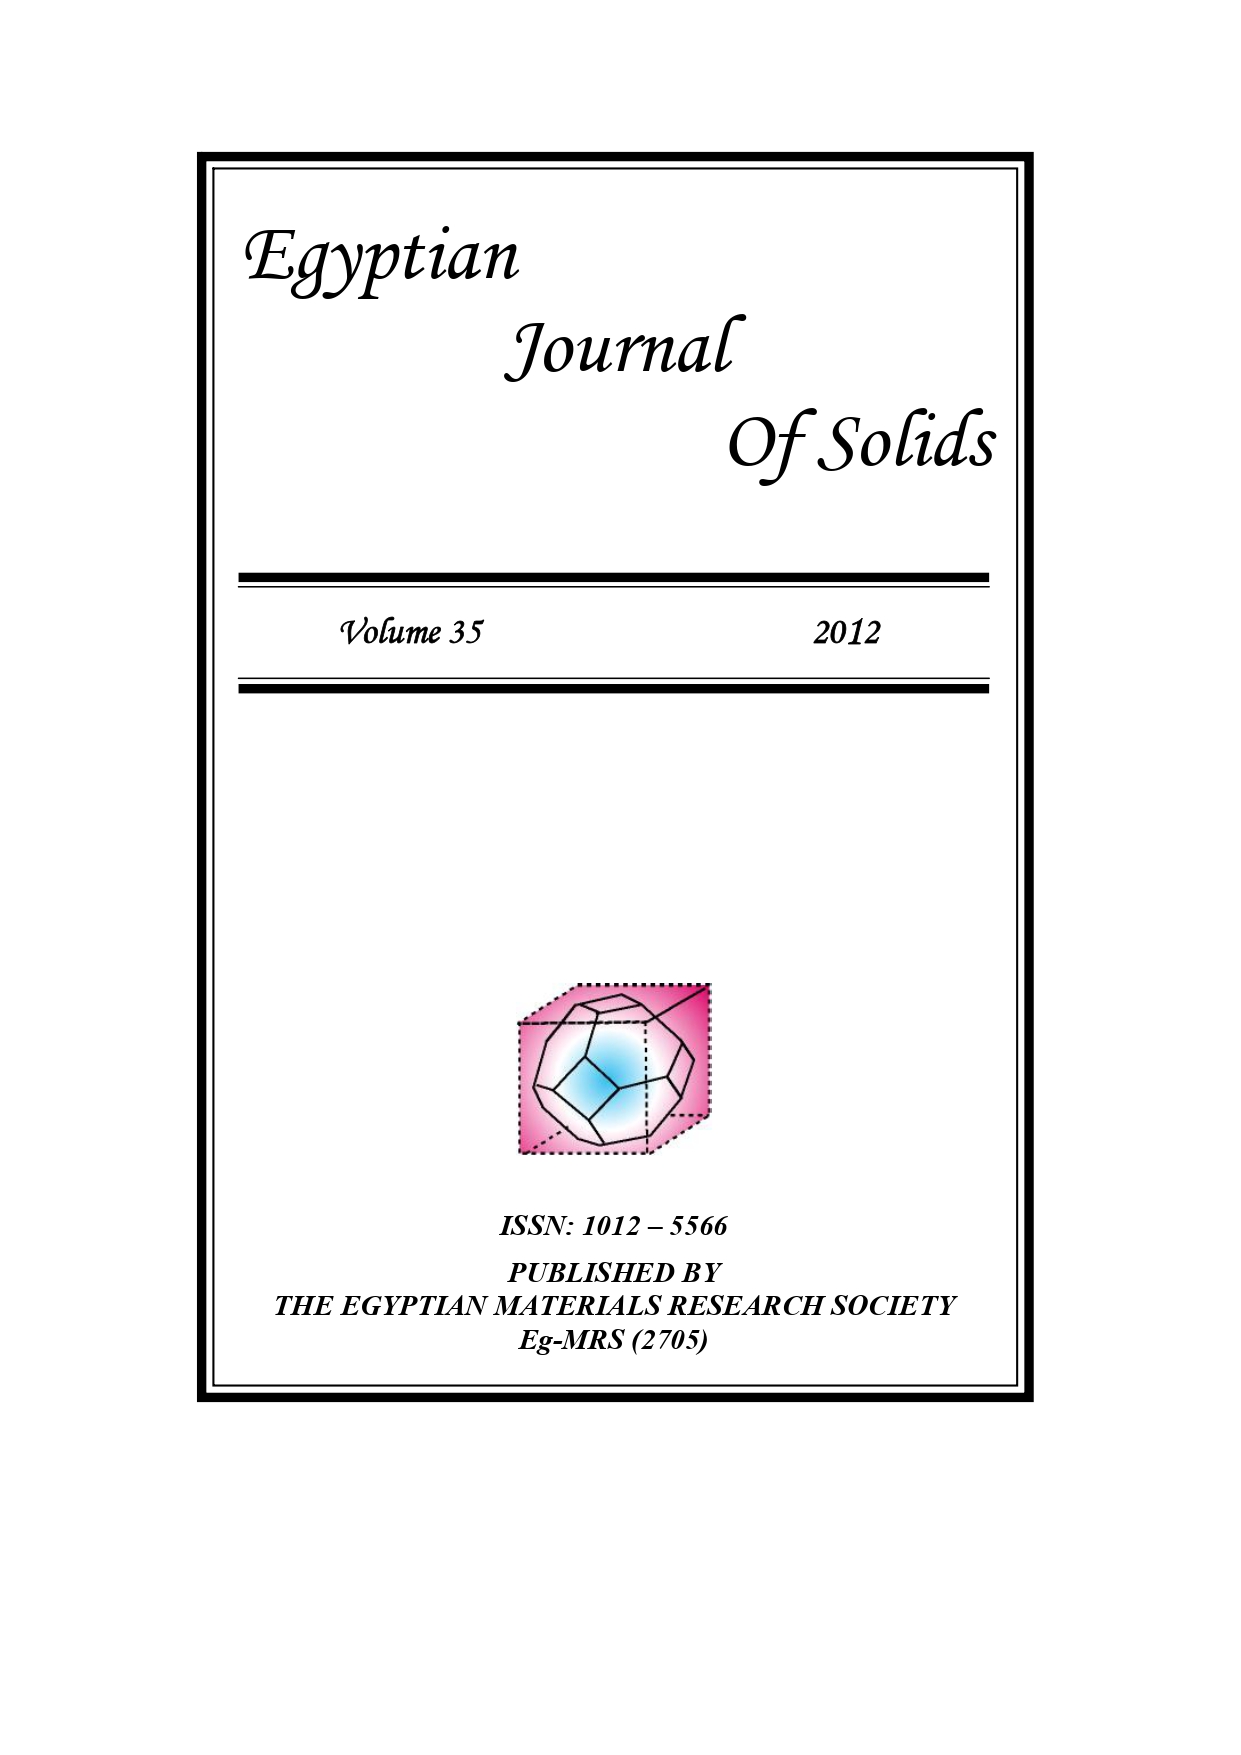 Egyptian Journal of Solids